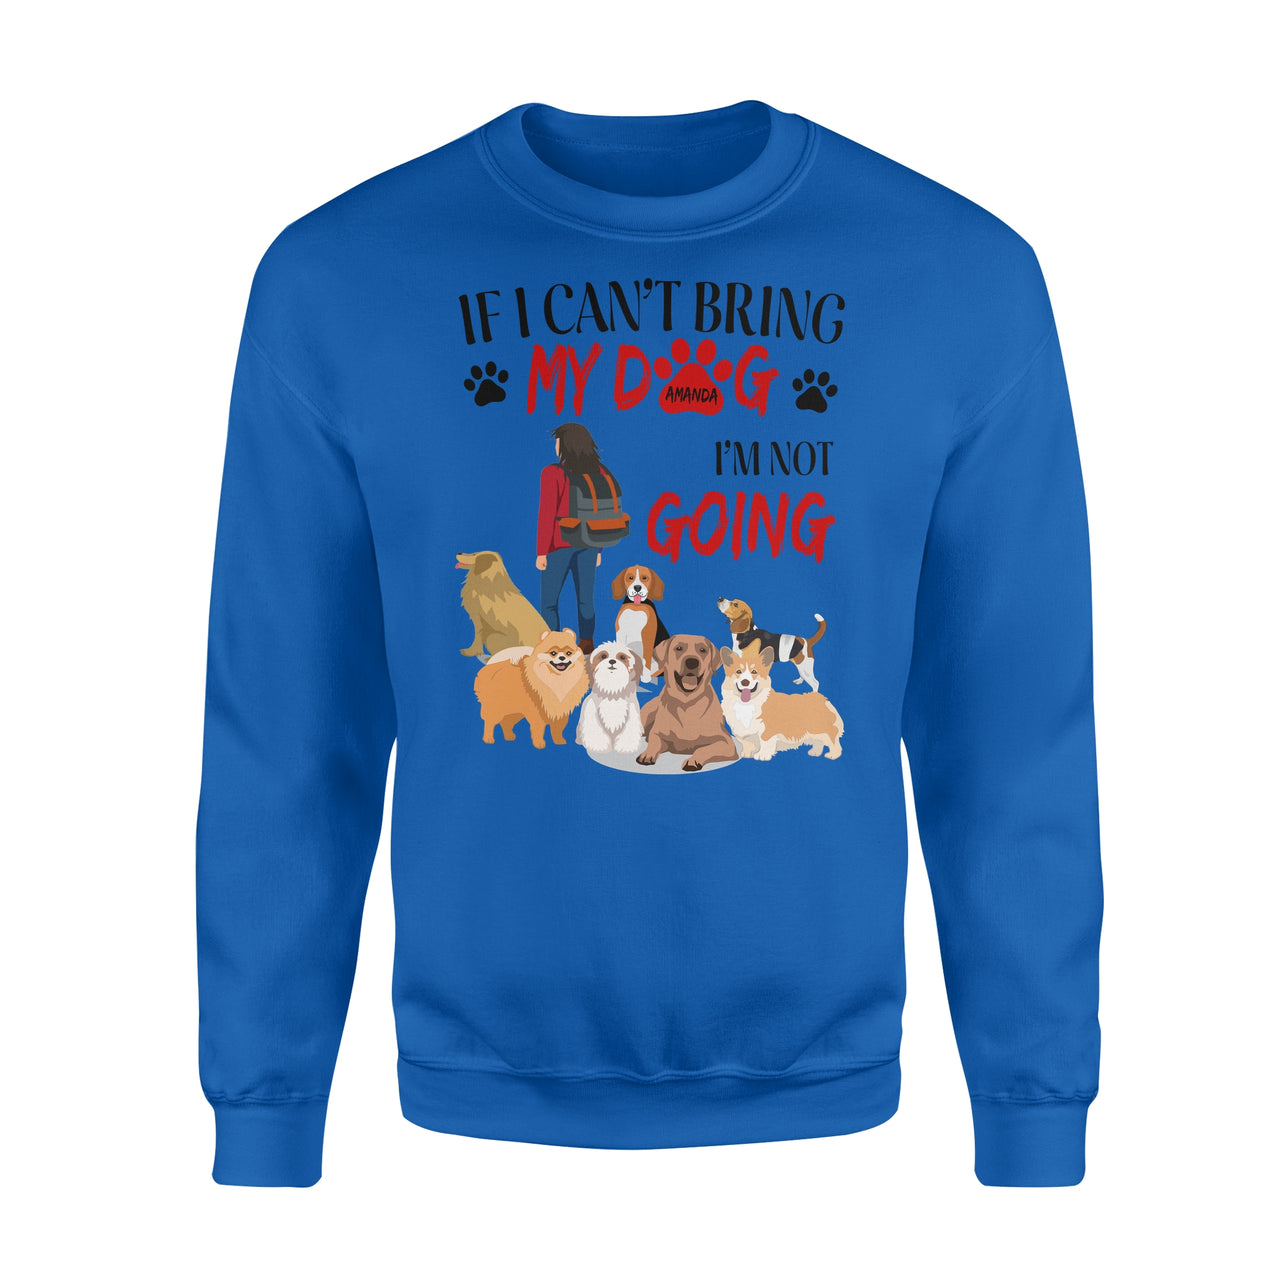 Personalized Dog Gift Idea - If I Can't Bring My Dog For Dog Mom - Standard Crew Neck Sweatshirt